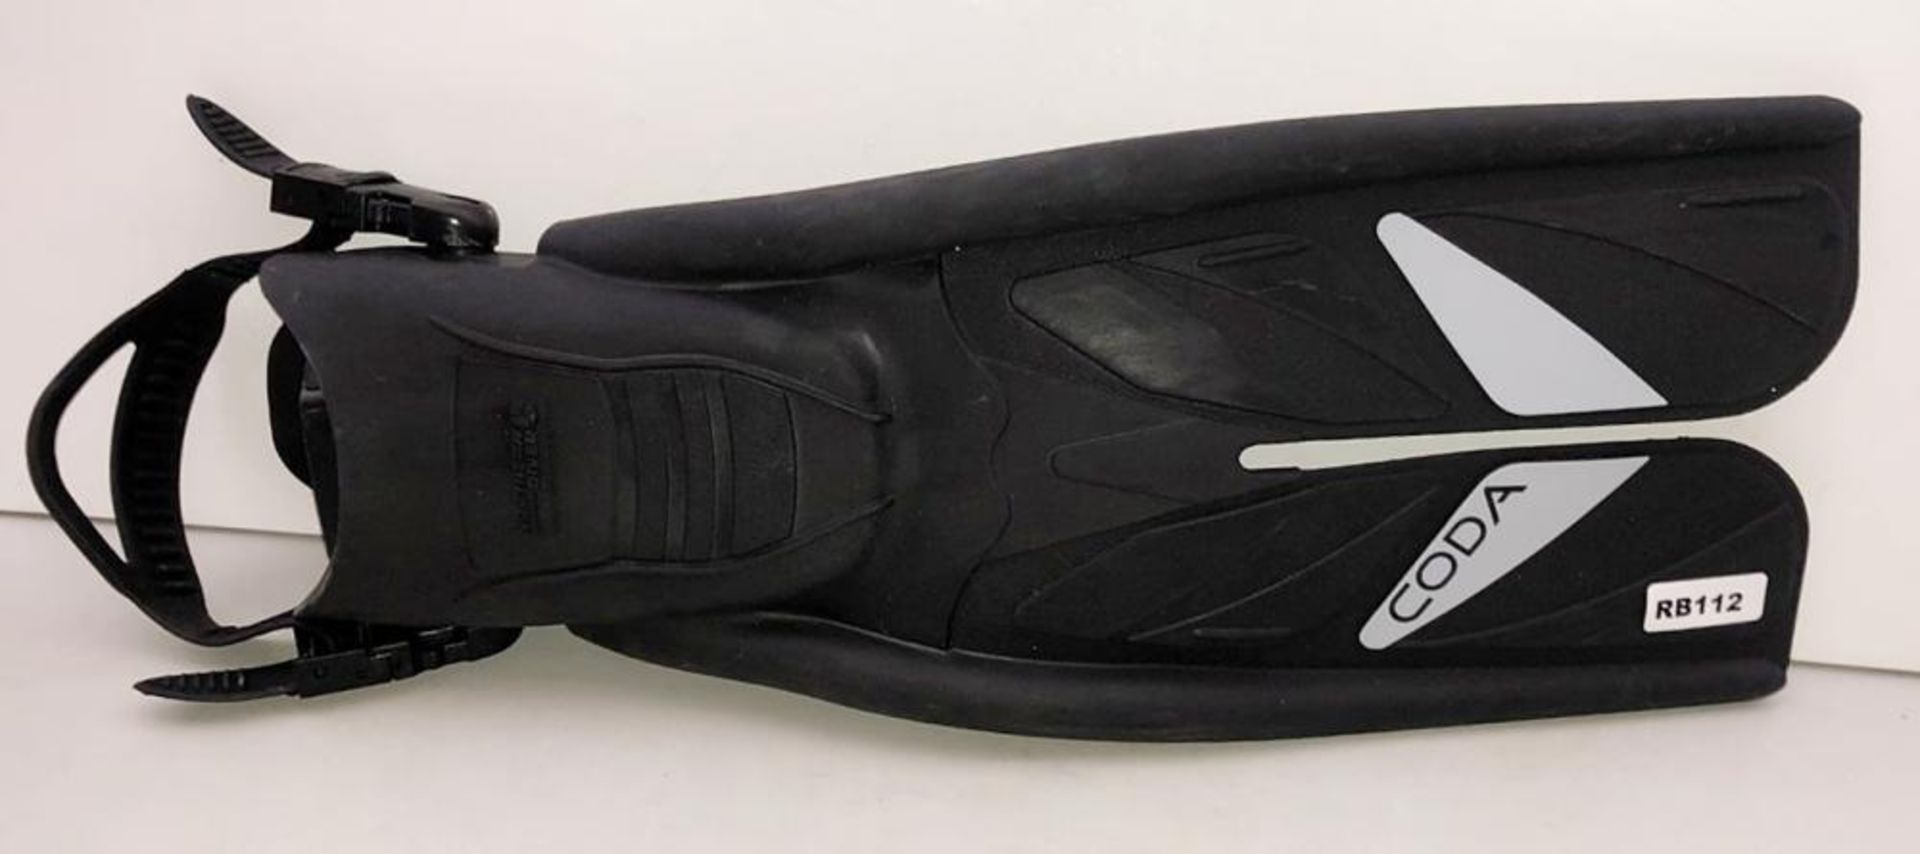 A Pair Of New XL Coda Dual Diving Fins - Ref: RB112, RB113 - CL349 - Location: Altrincham WA14 - RRP - Image 4 of 8